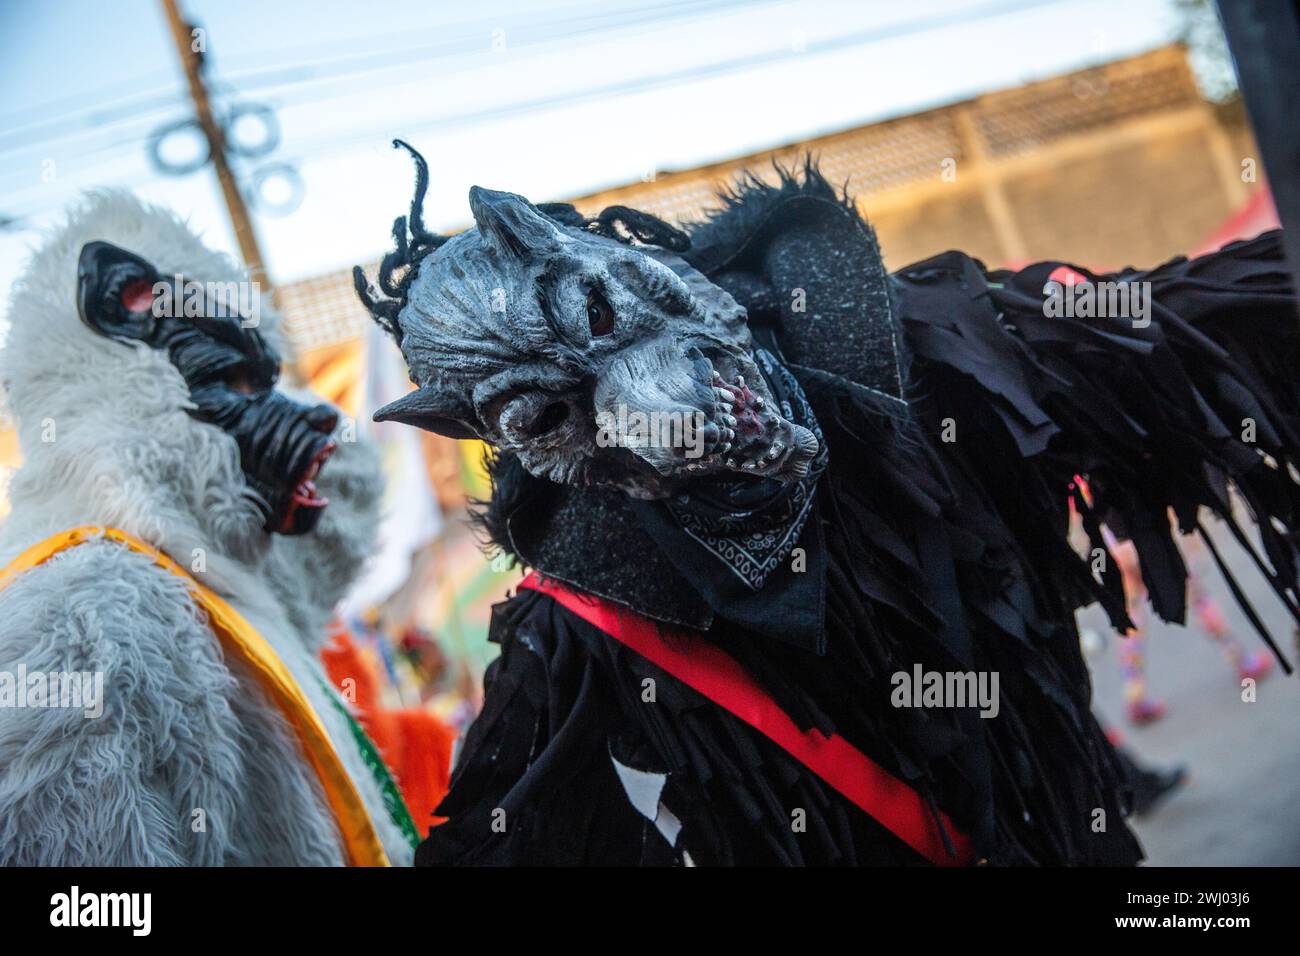 Barranquilla, Colombia. 11th Feb, 2024. People dressed as wolves take part during the carnival The Barranquilla Carnival is one of the most important folkloric festivals in Colombia, also one of the best-known carnivals in Latin America and an intangible cultural heritage of humanity proclaimed by UNESCO in 2003. It is a set of cultures, native, African and Spanish that is reflected in the dances, the masks, the floats, the dresses and the music. It attracts tourists from all over the world and international media attention. Credit: SOPA Images Limited/Alamy Live News Stock Photo